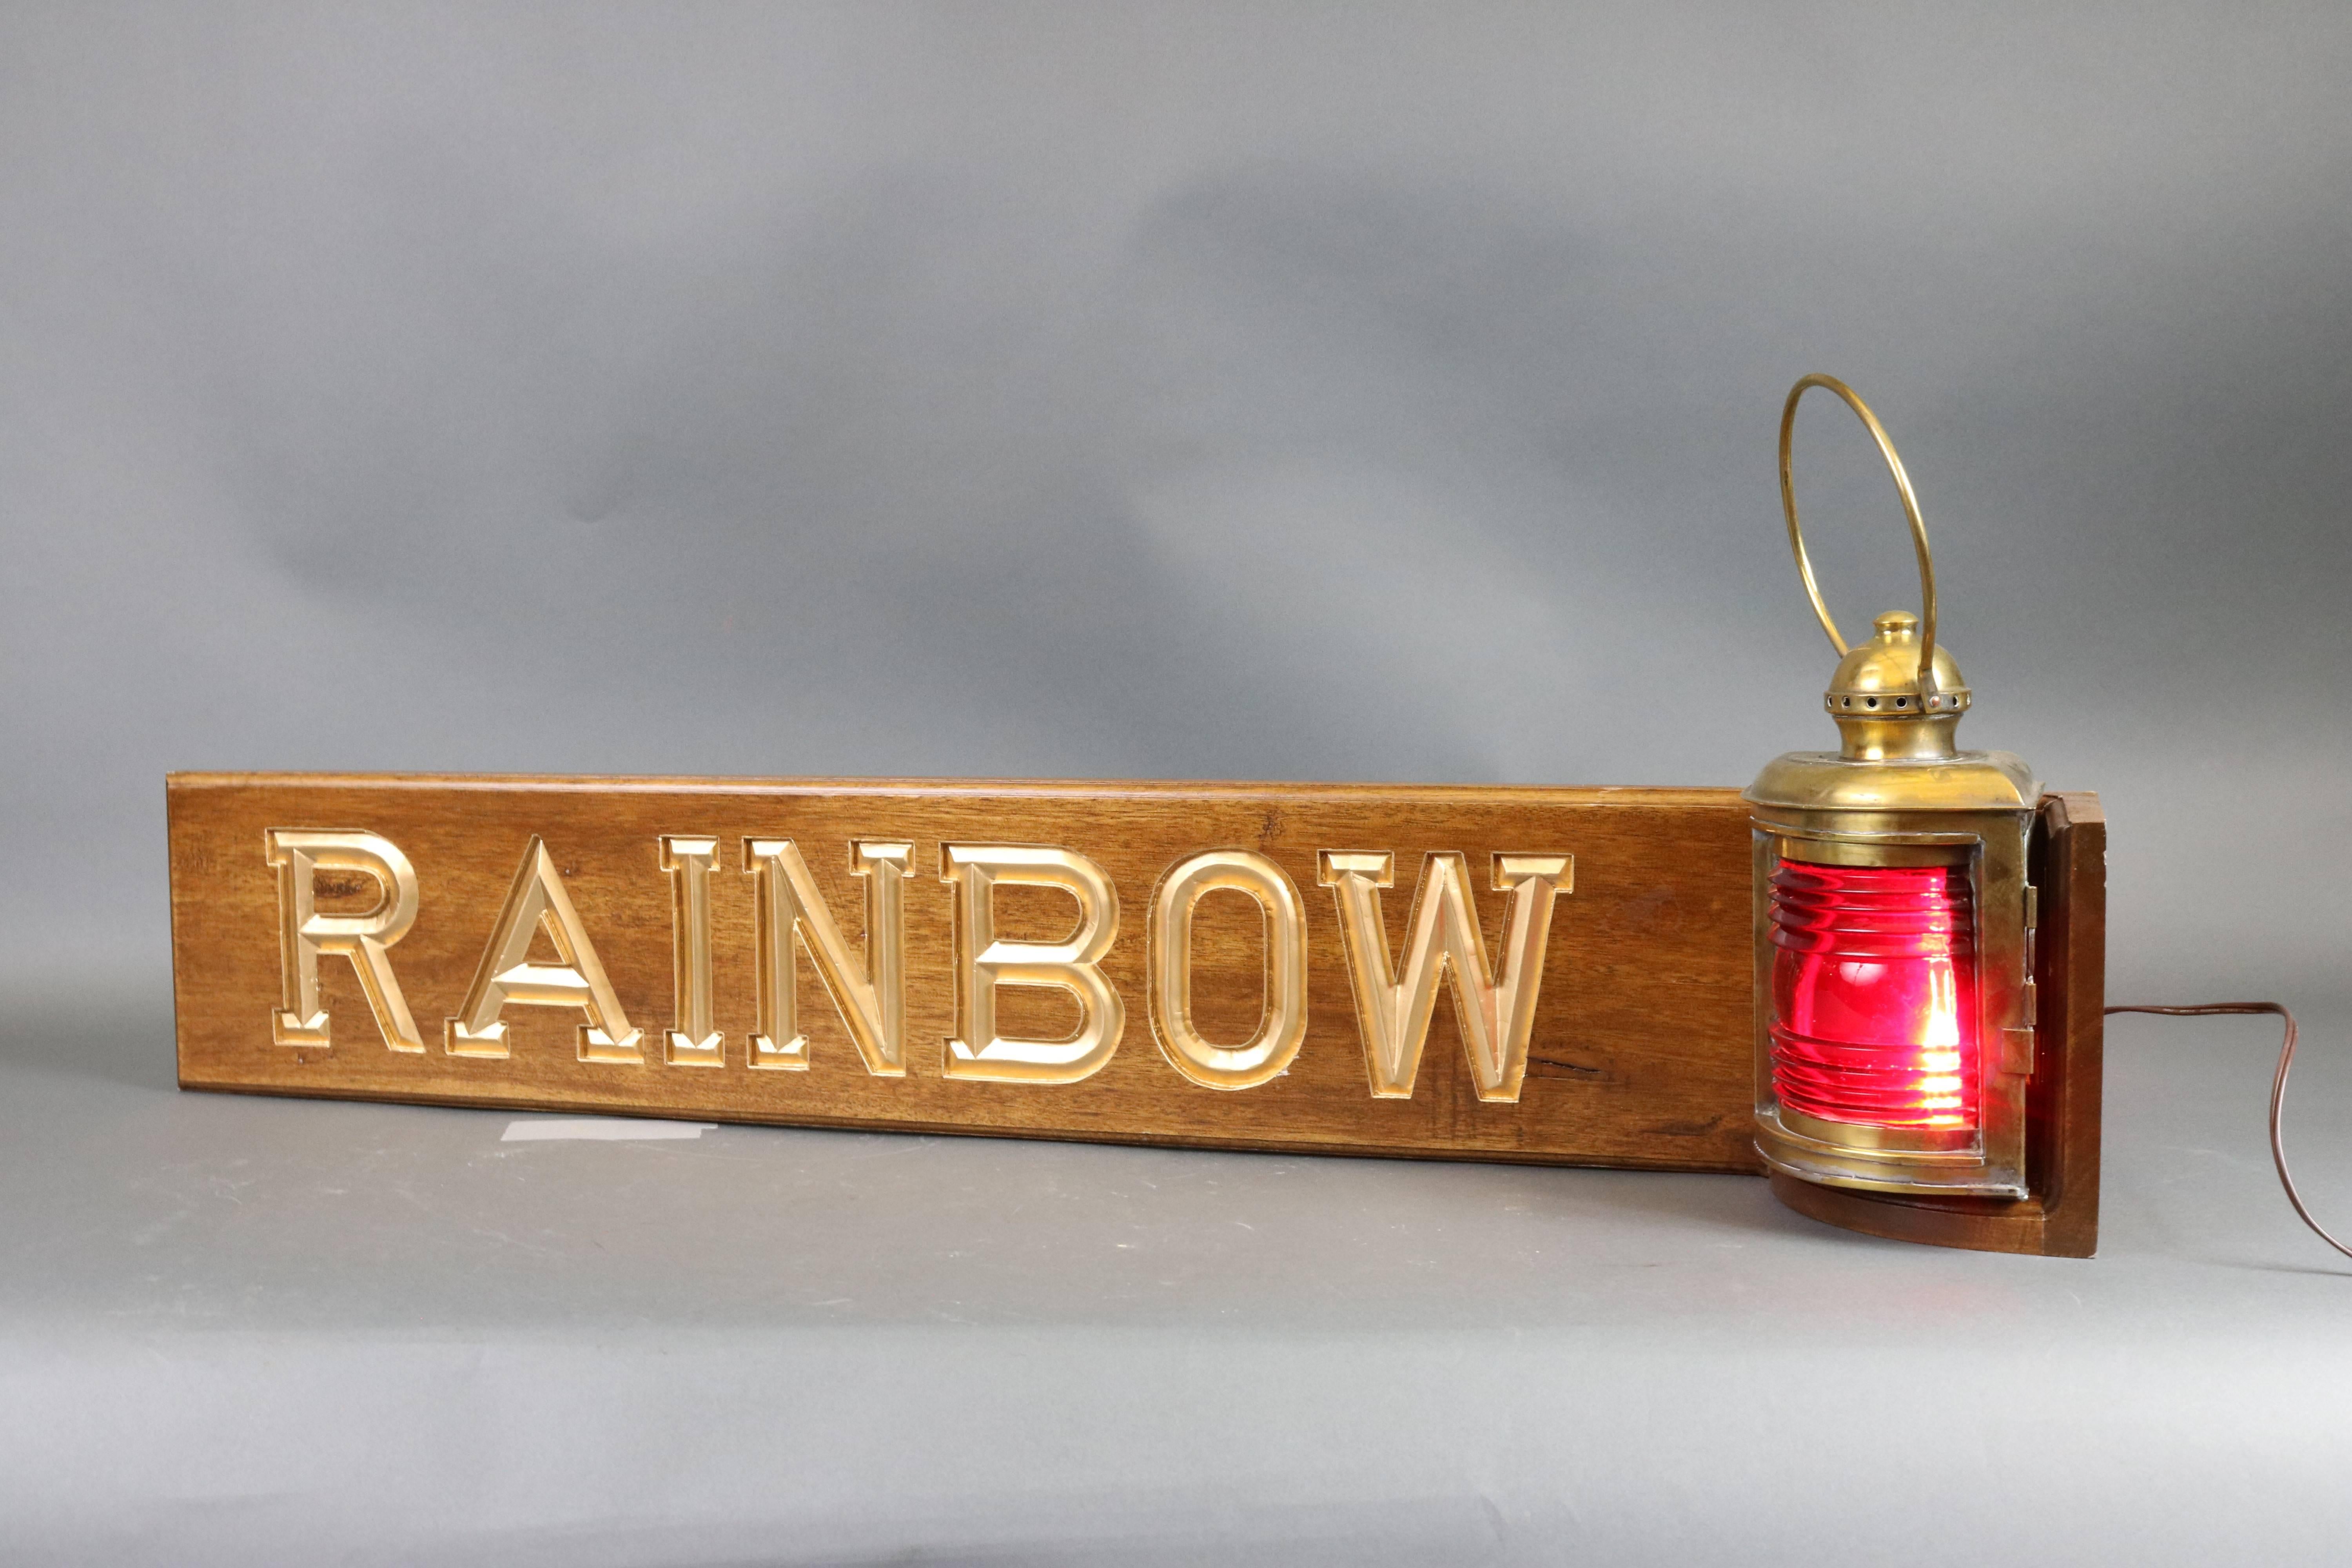 Deeply carved mahogany name board with "Rainbow" in gold paint and fitted with a solid brass antique ship's lantern. Electrified. Dimensions" 42" L x 6" W x 11" H (w/o handle).